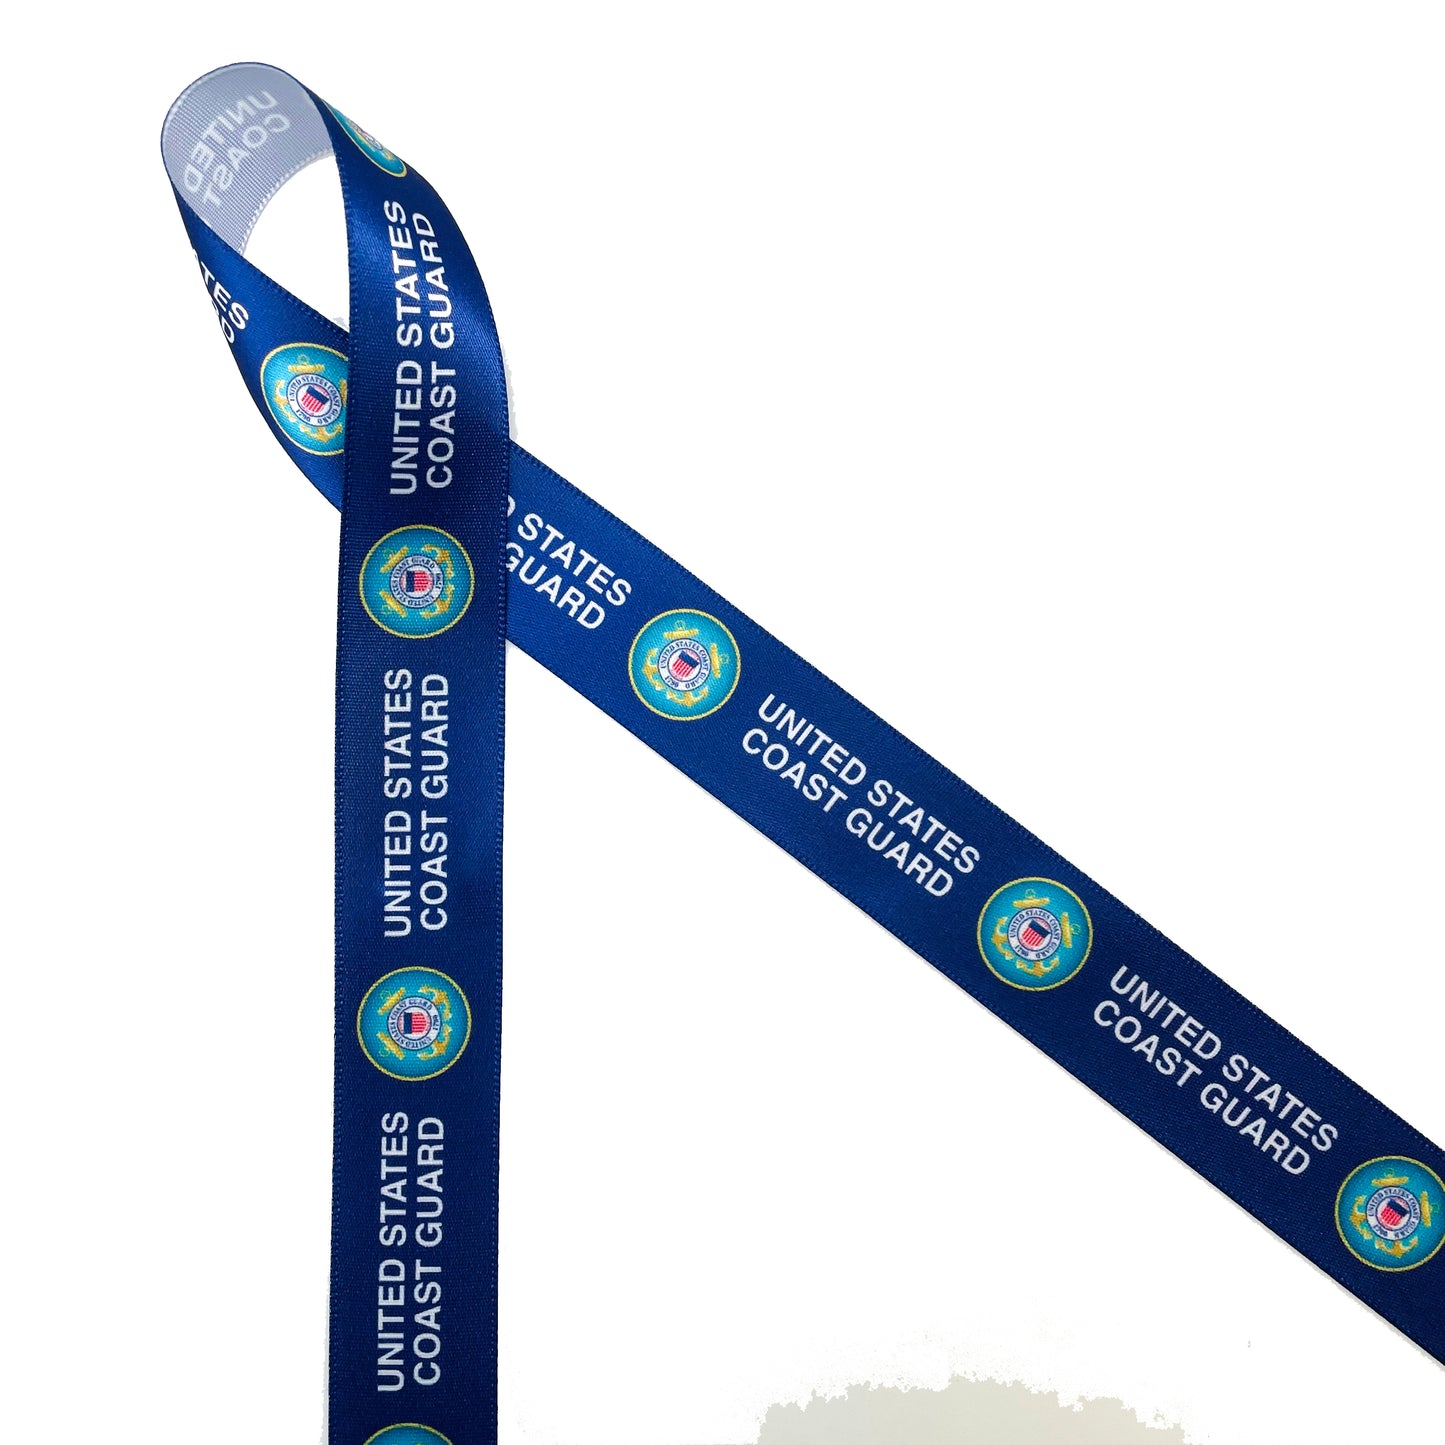 United States Coast Guard Logo Ribbon with a blue background on 5/8"and7/8" white single face satin ribbon